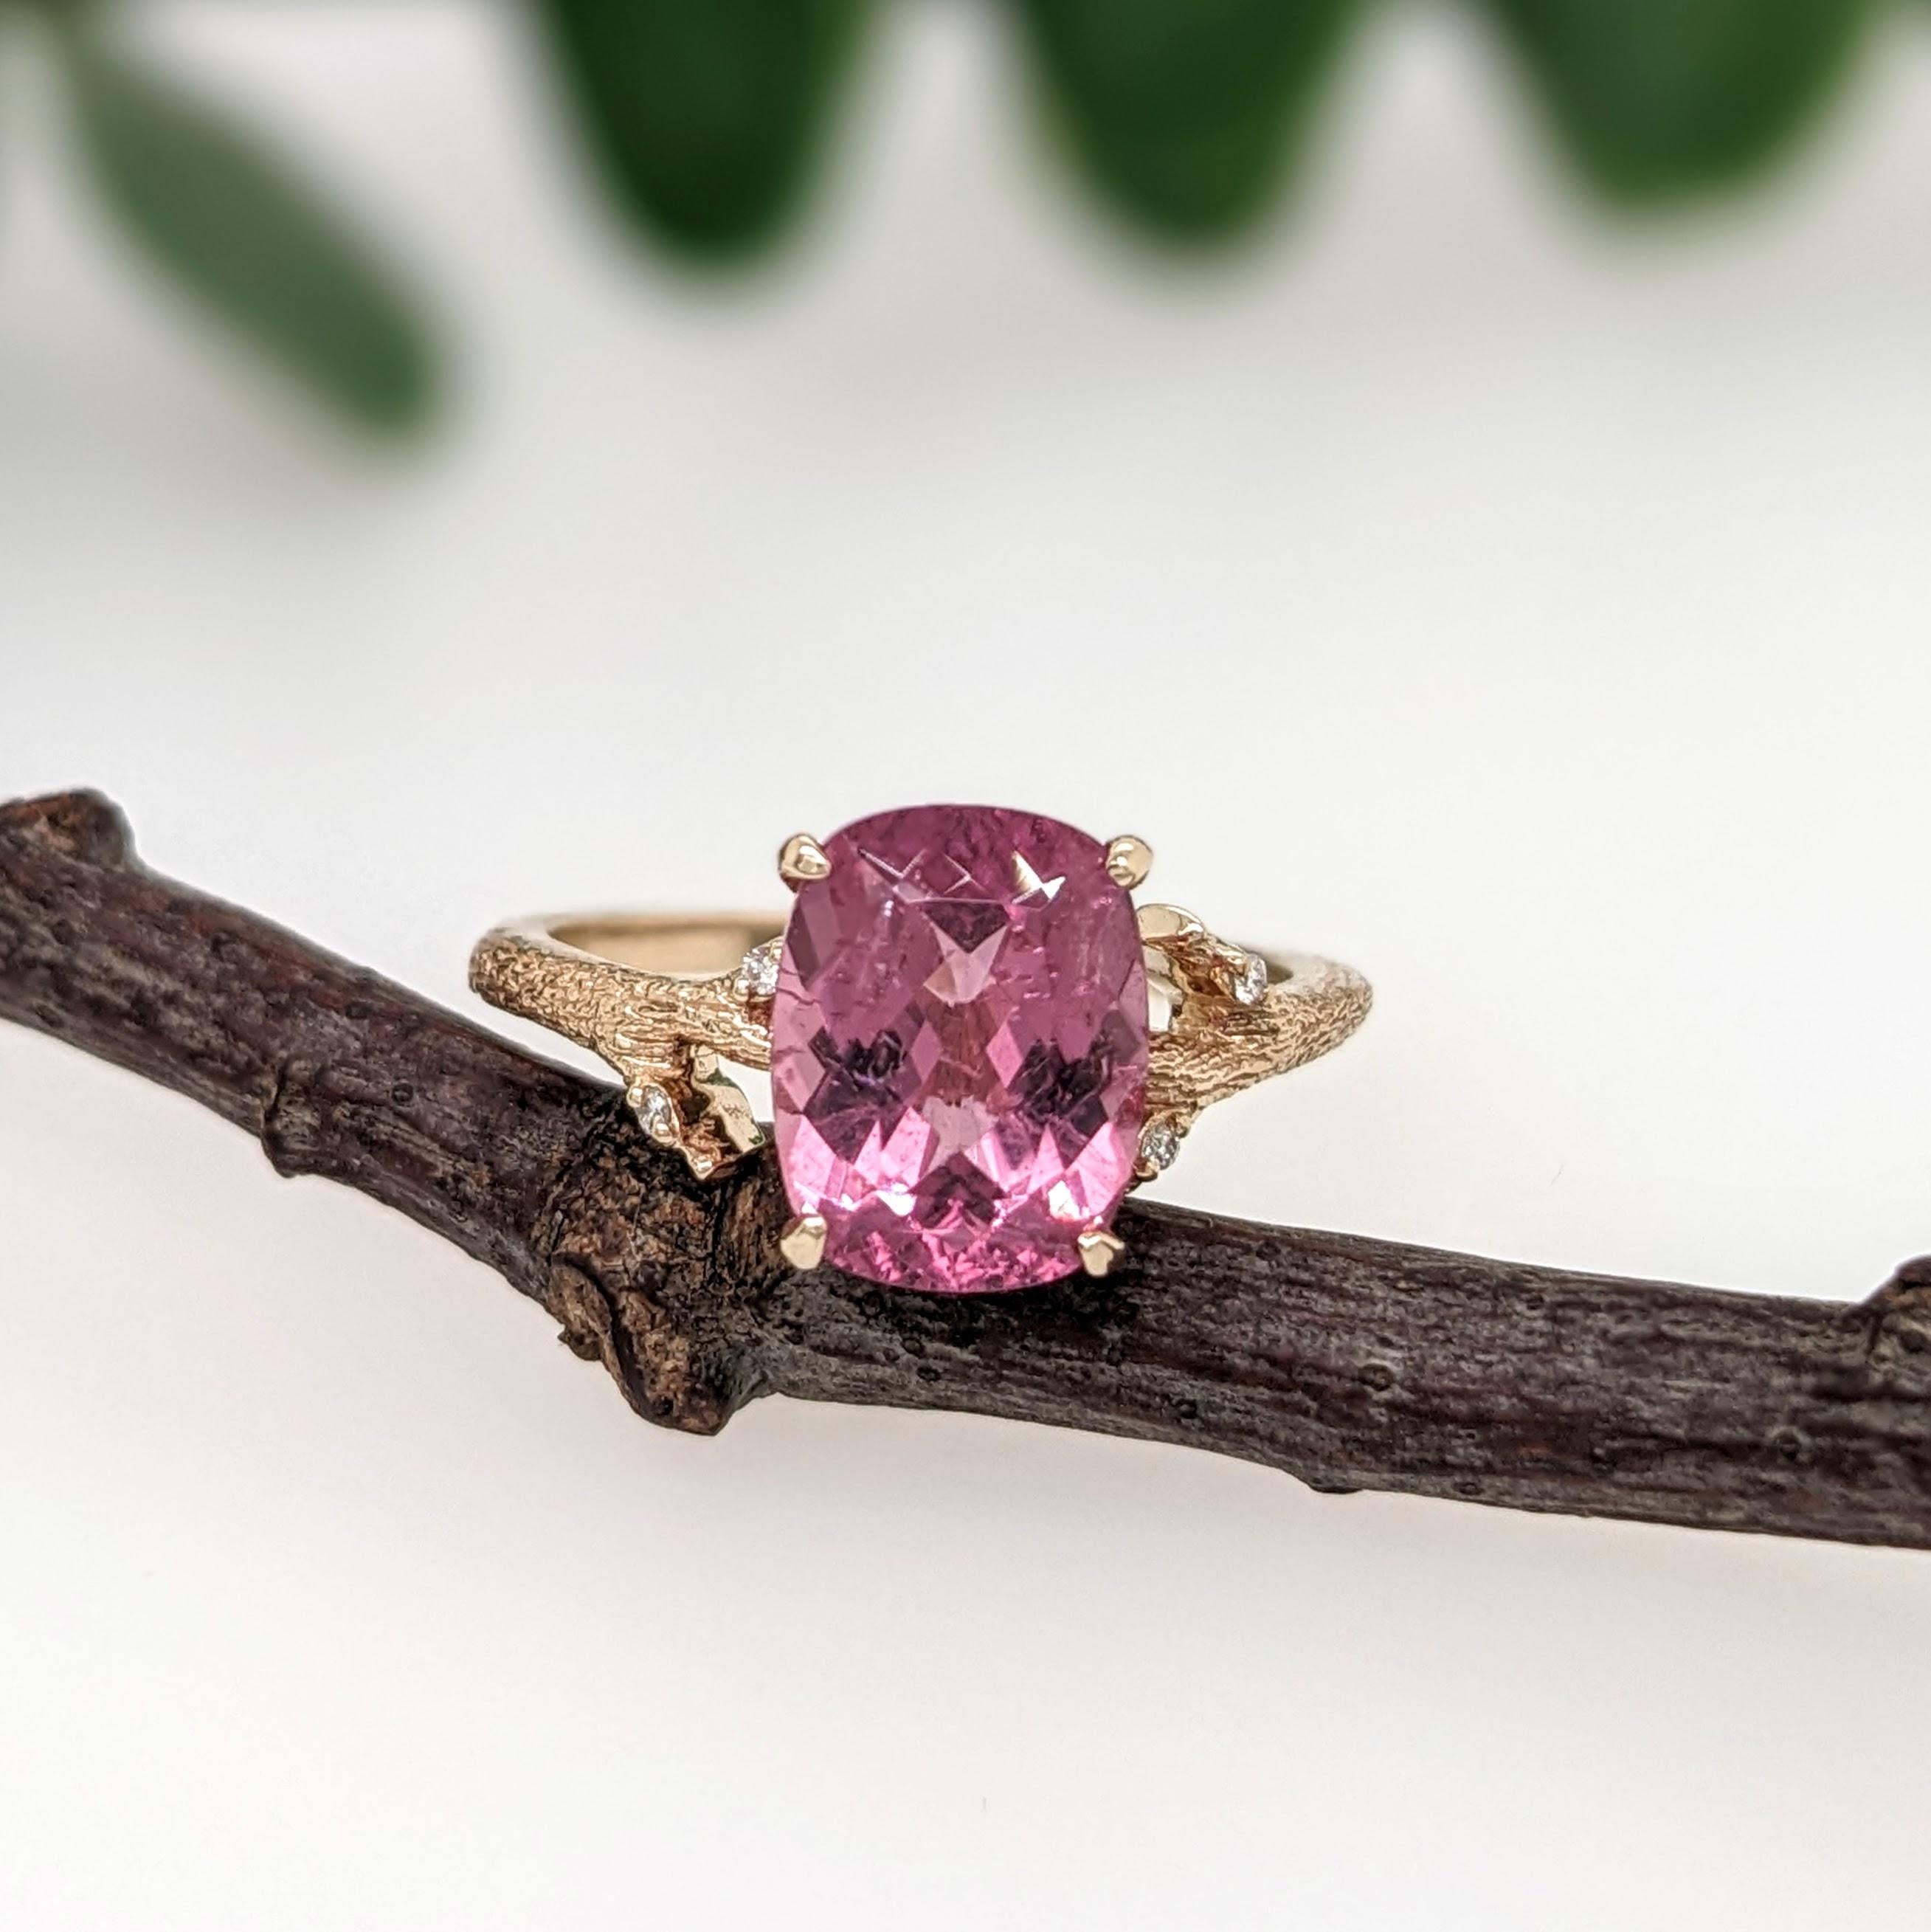 This ring features a beautiful 2.08 carat pink Tourmaline with sparkling natural diamond accents all set in 14k white Gold. A gorgeous ring to showcase this unique stone!

Specifications

Item Type: Ring
Center Stone: Pink Tourmaline
Treatment: